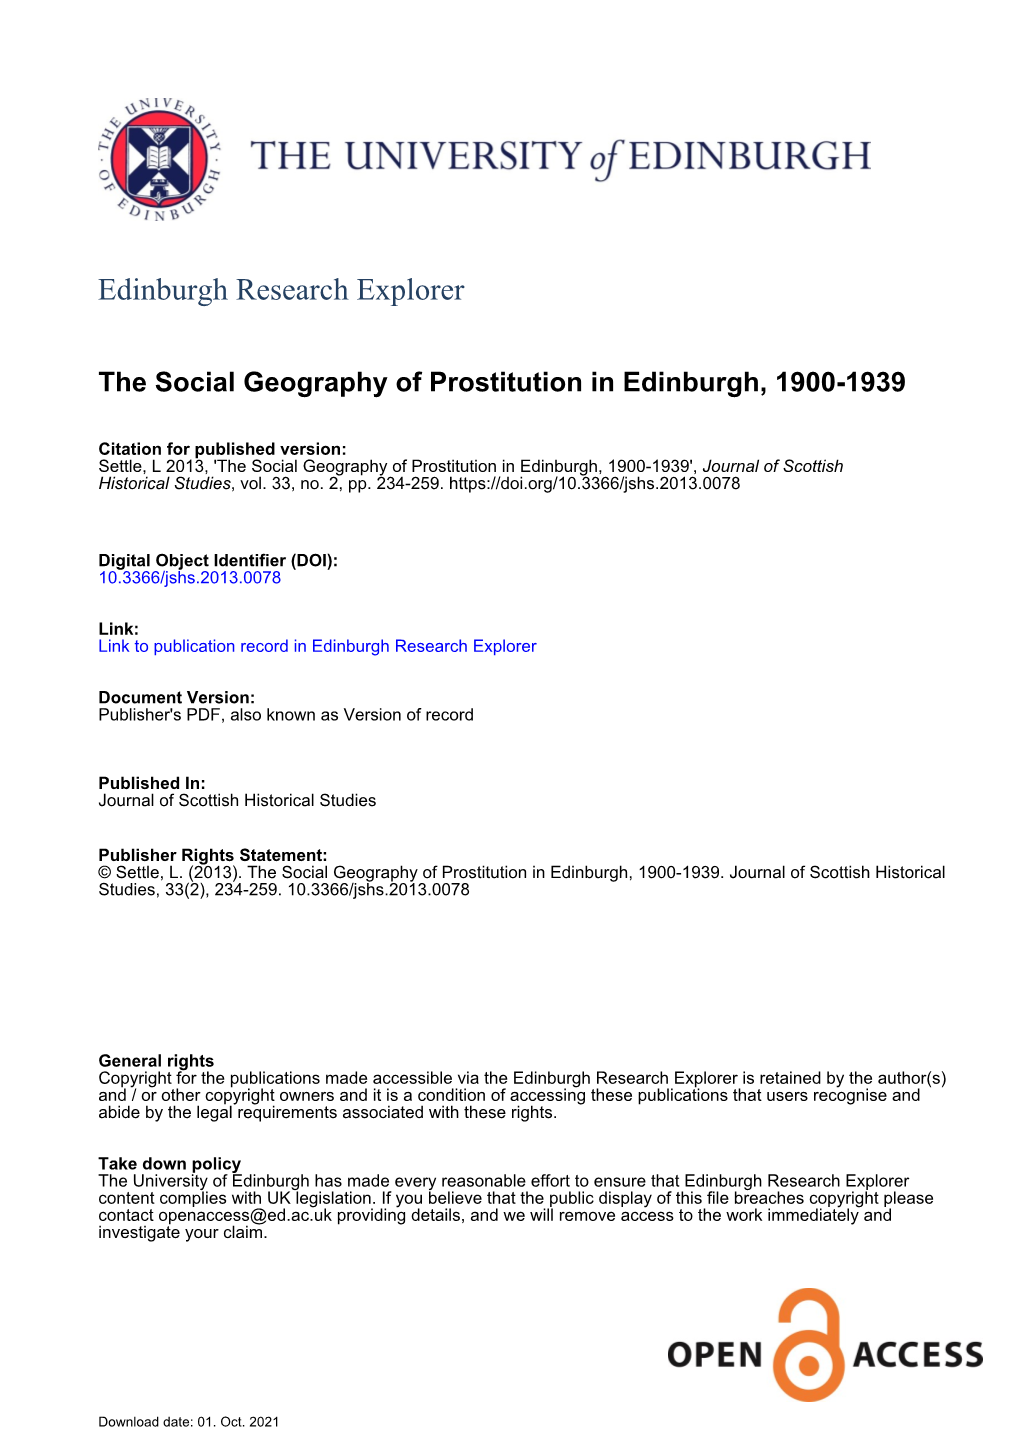 The Social Geography of Prostitution in Edinburgh, 1900-1939